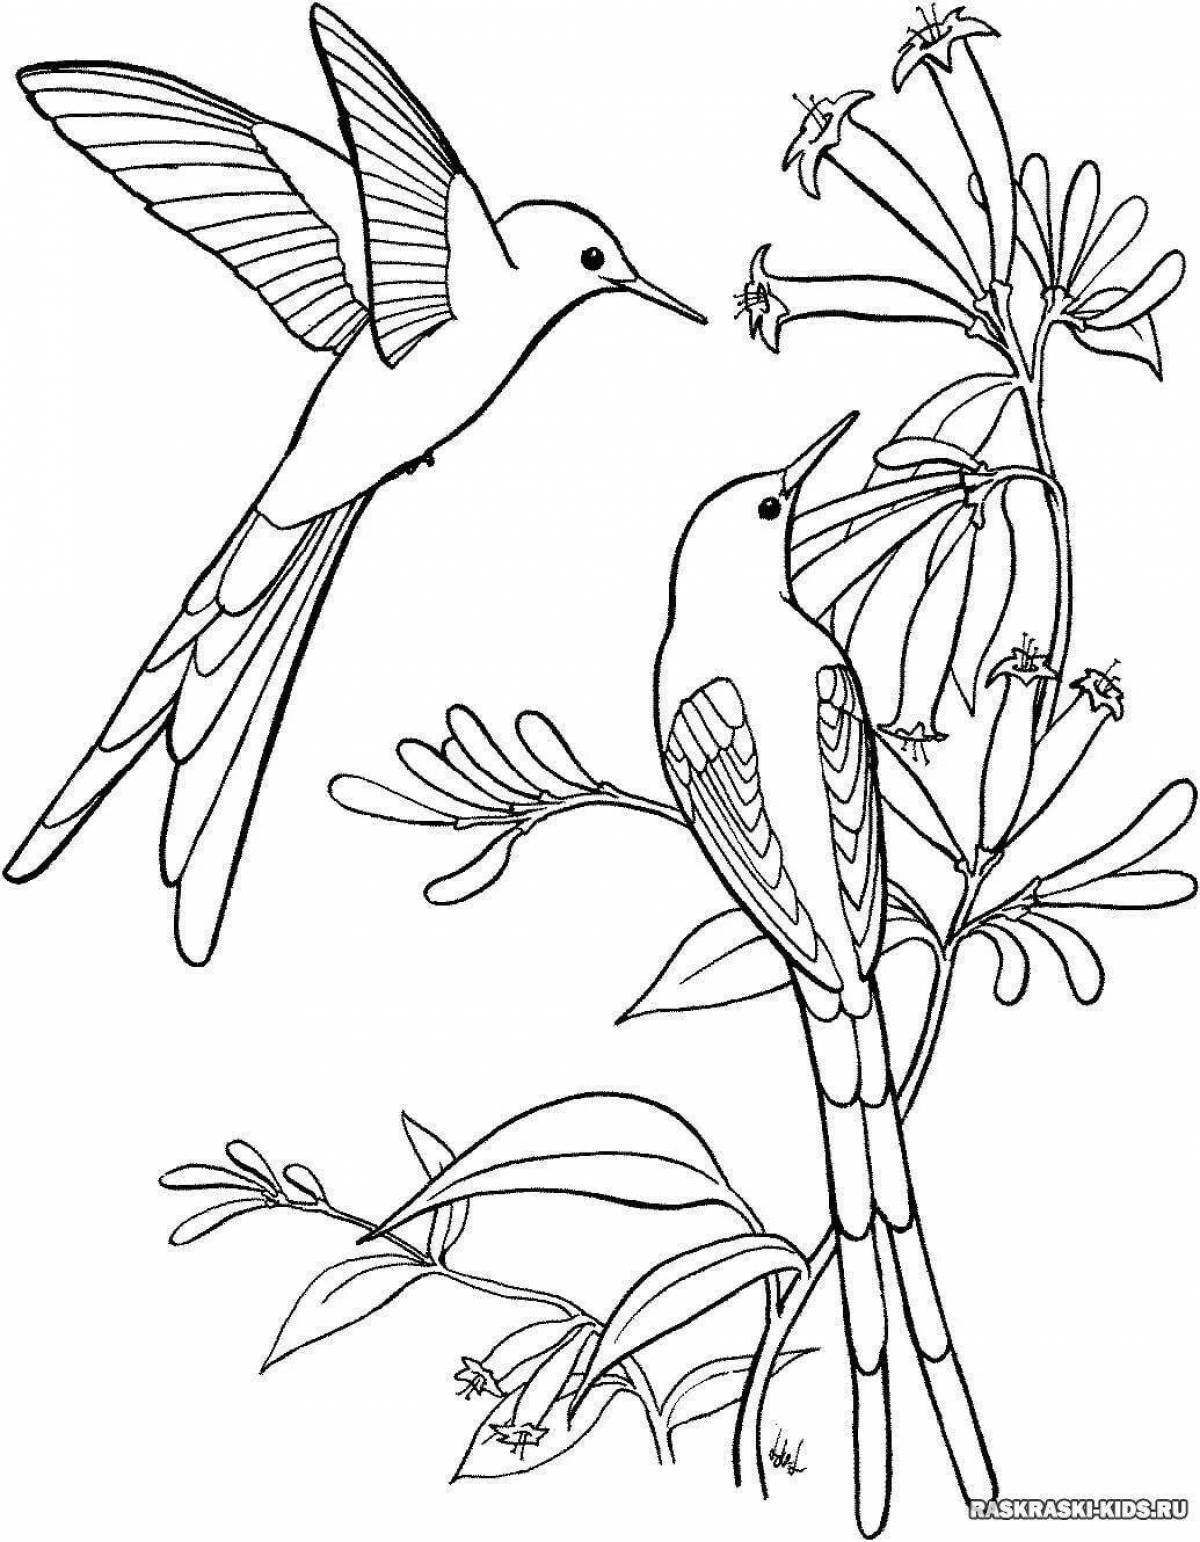 Cute bird drawing coloring page